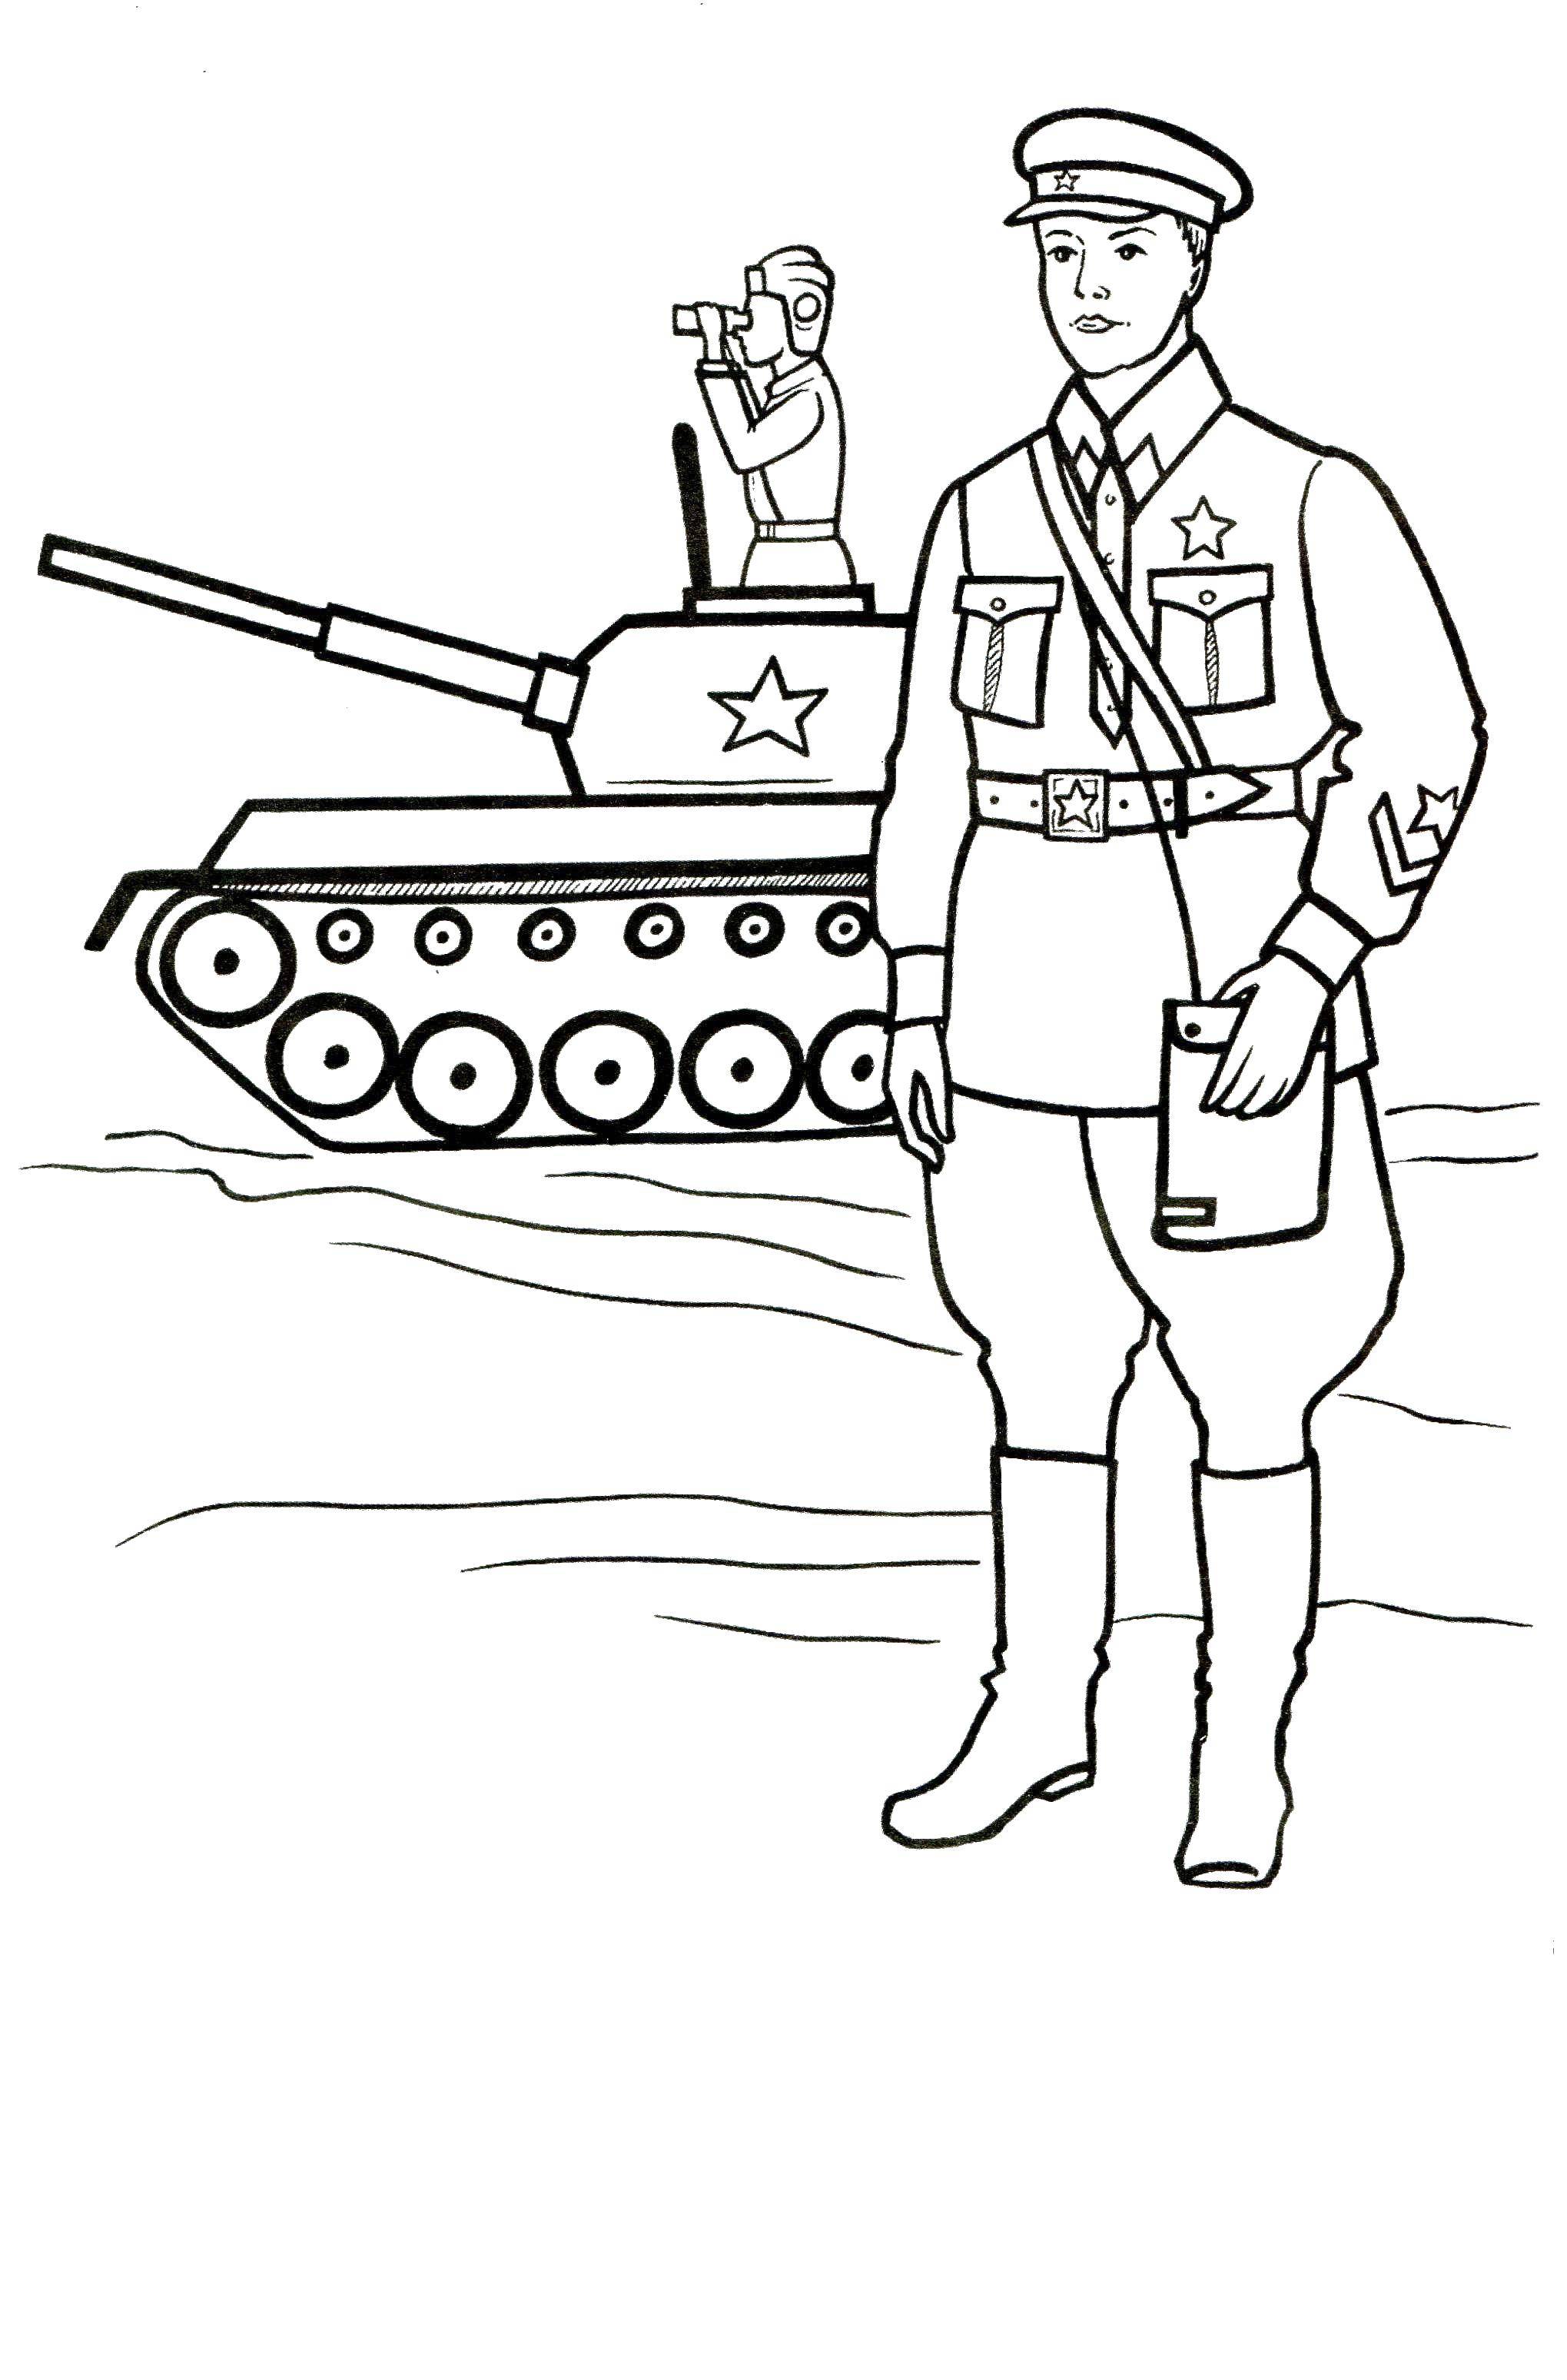 Coloring Soldiers, tank. Category military coloring pages. Tags:  soldier, war, tank.